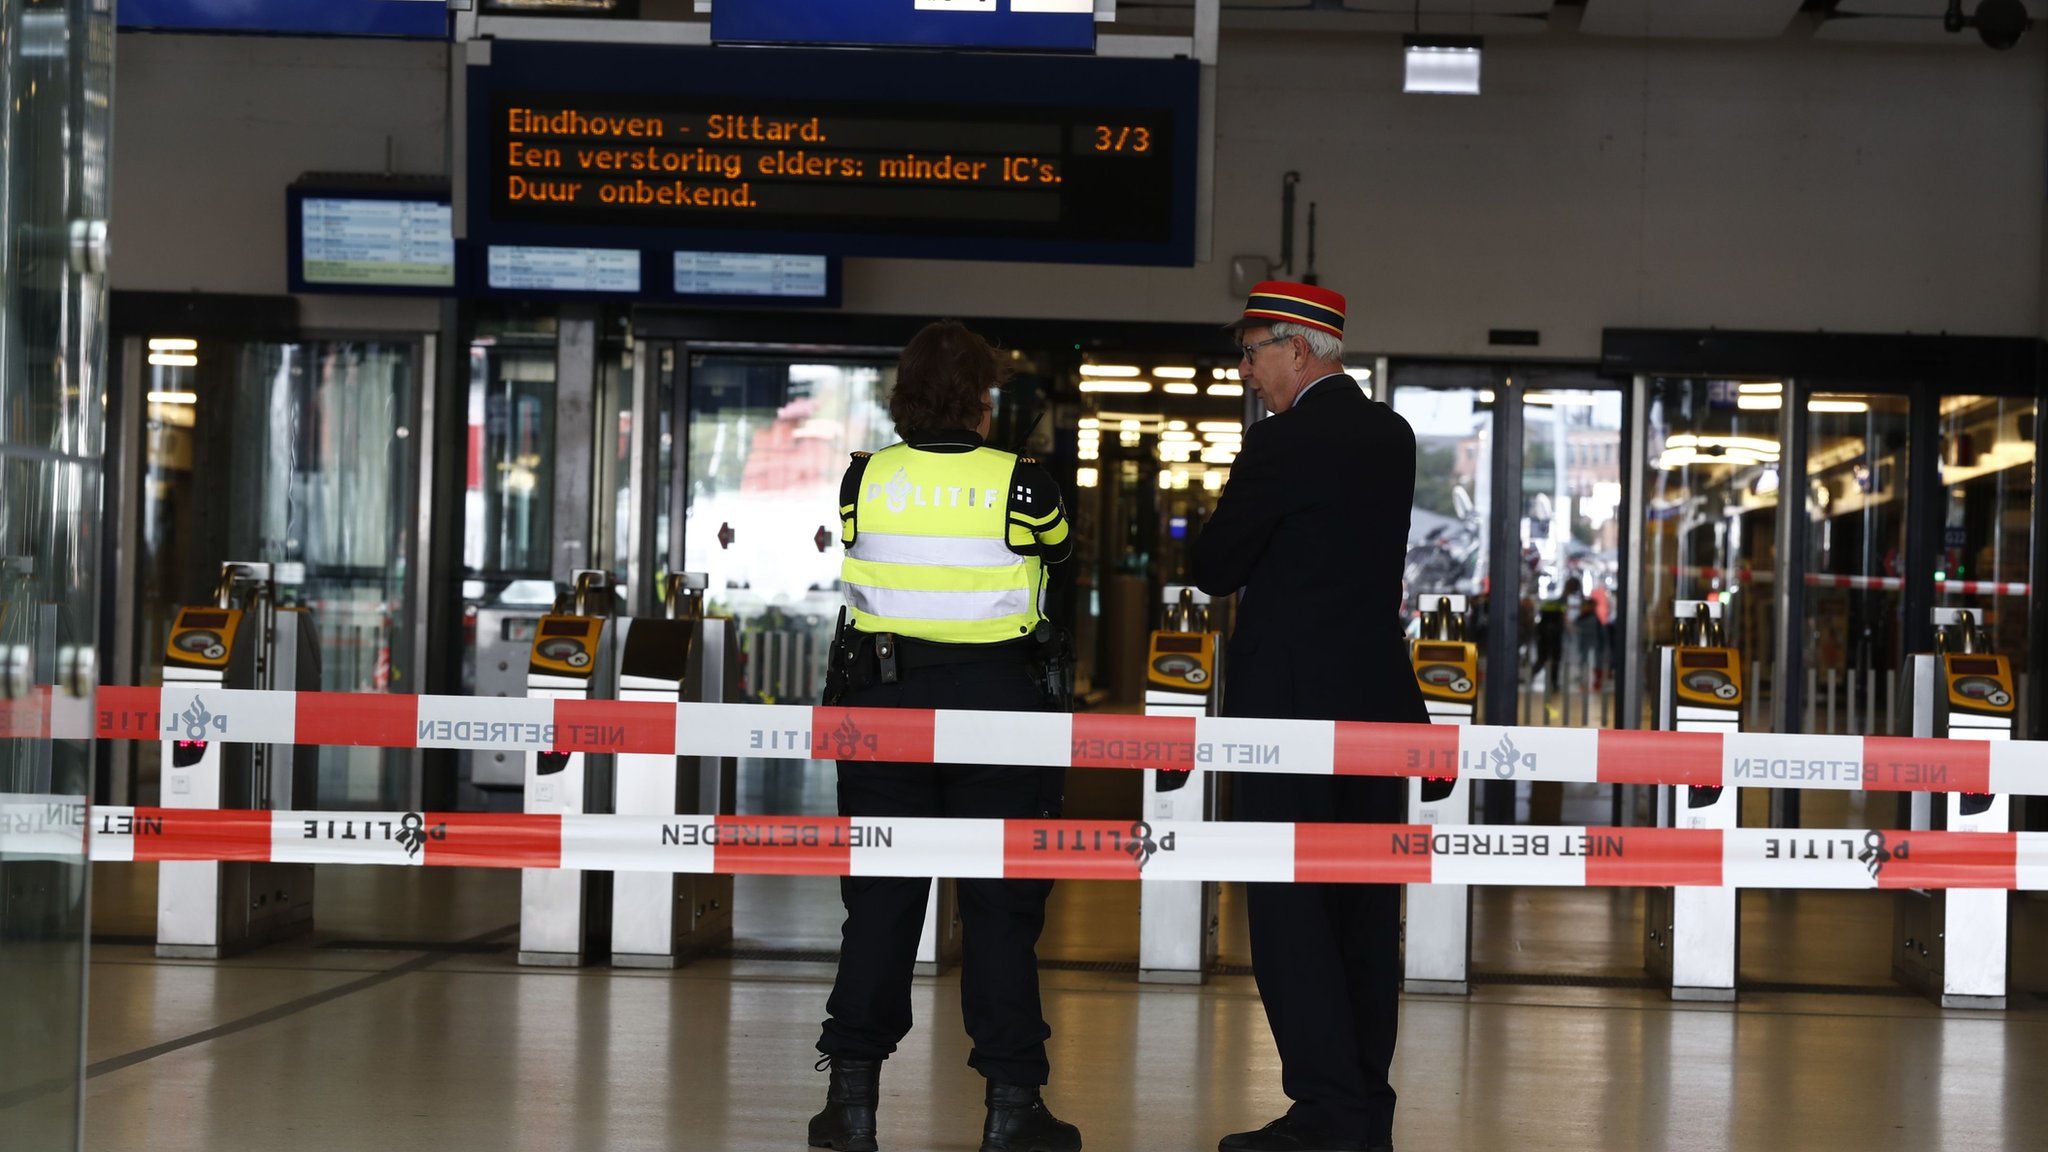 Officials stand inside a cordoned-off area at The Central Railway Station in Amsterdam on August 31, 2018,